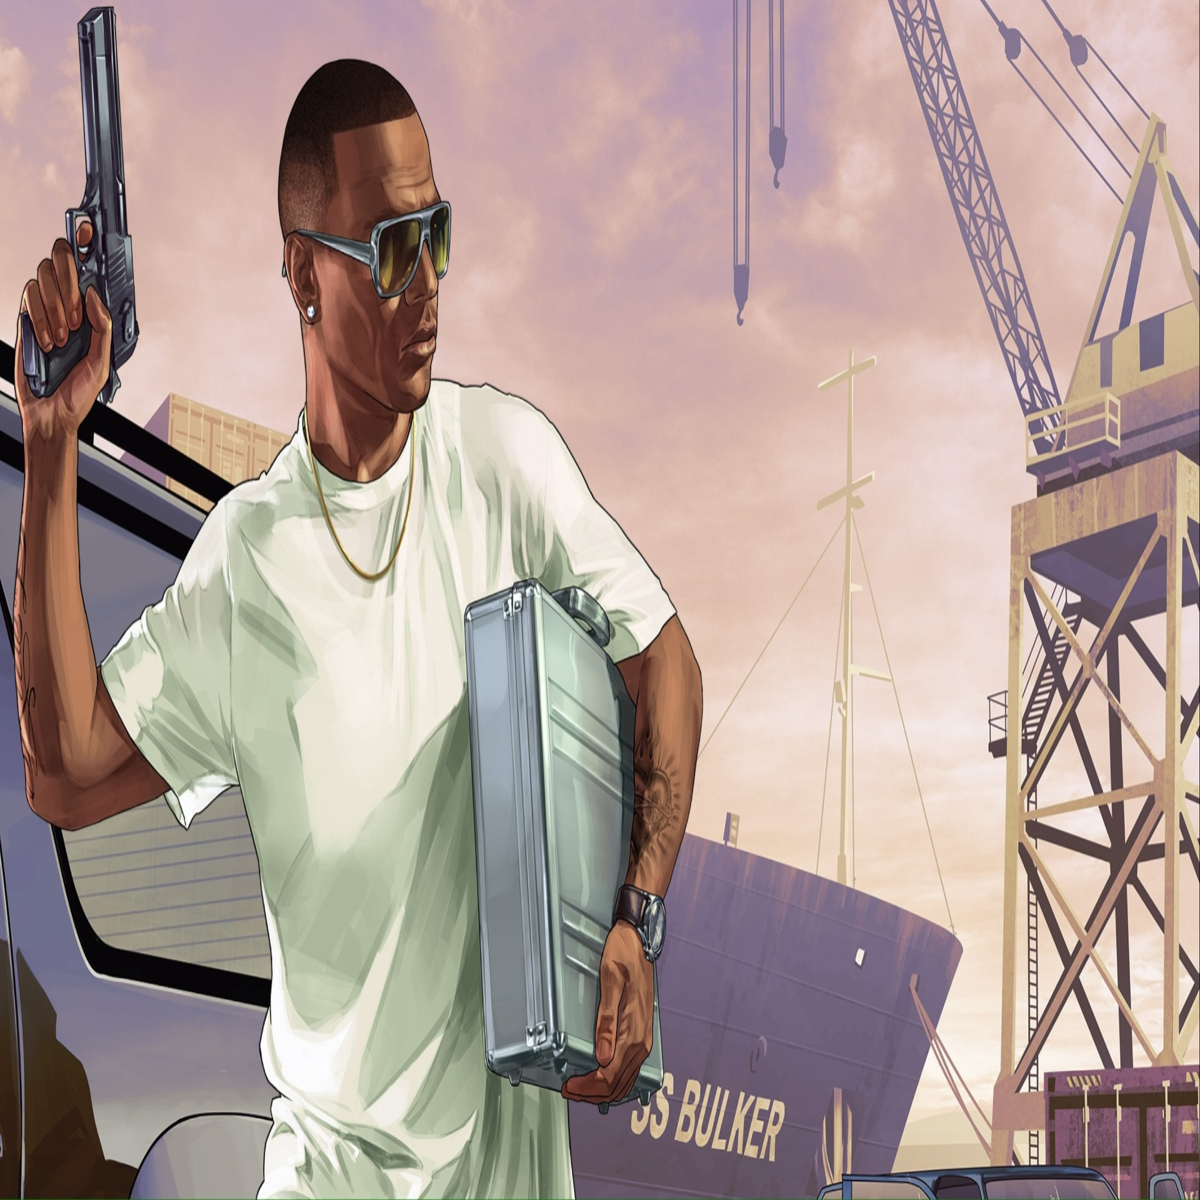 GTA Online is now free but not for everyone: Here's how to check